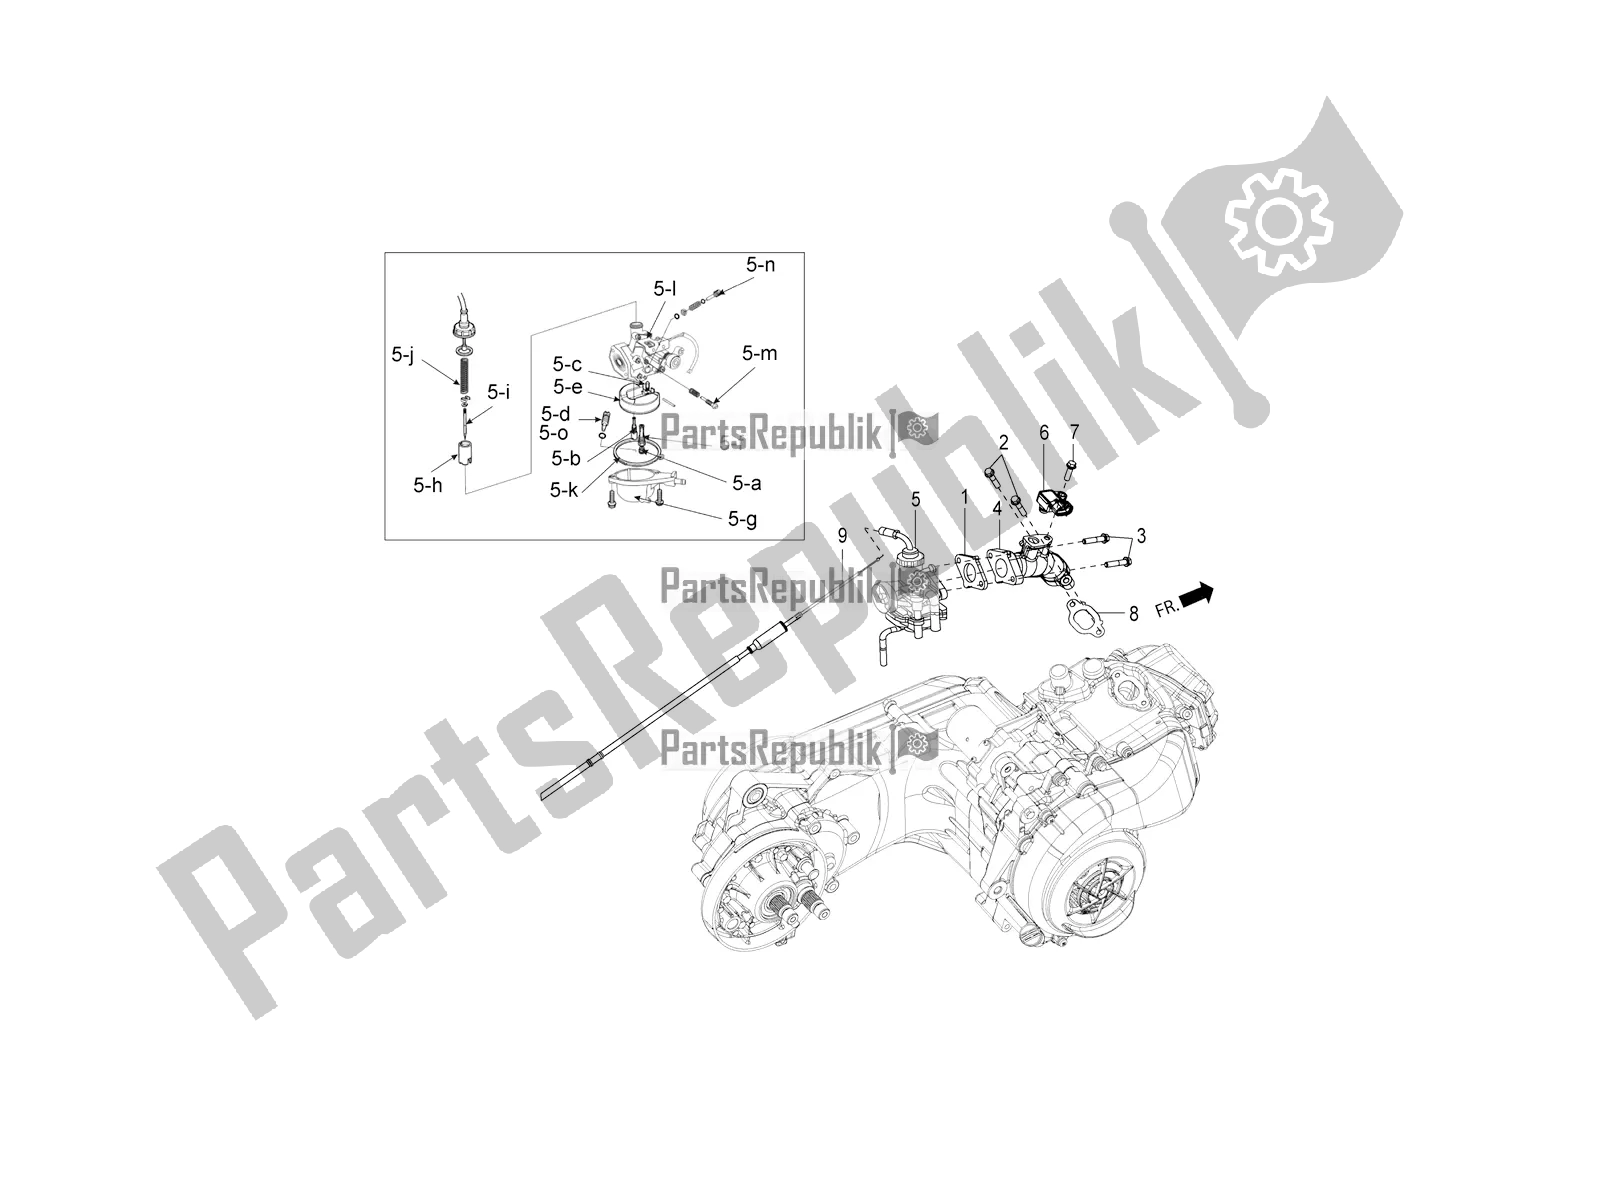 All parts for the Carburettor-spare Parts of the Aprilia SR Motard 150 ABS Apac 2020